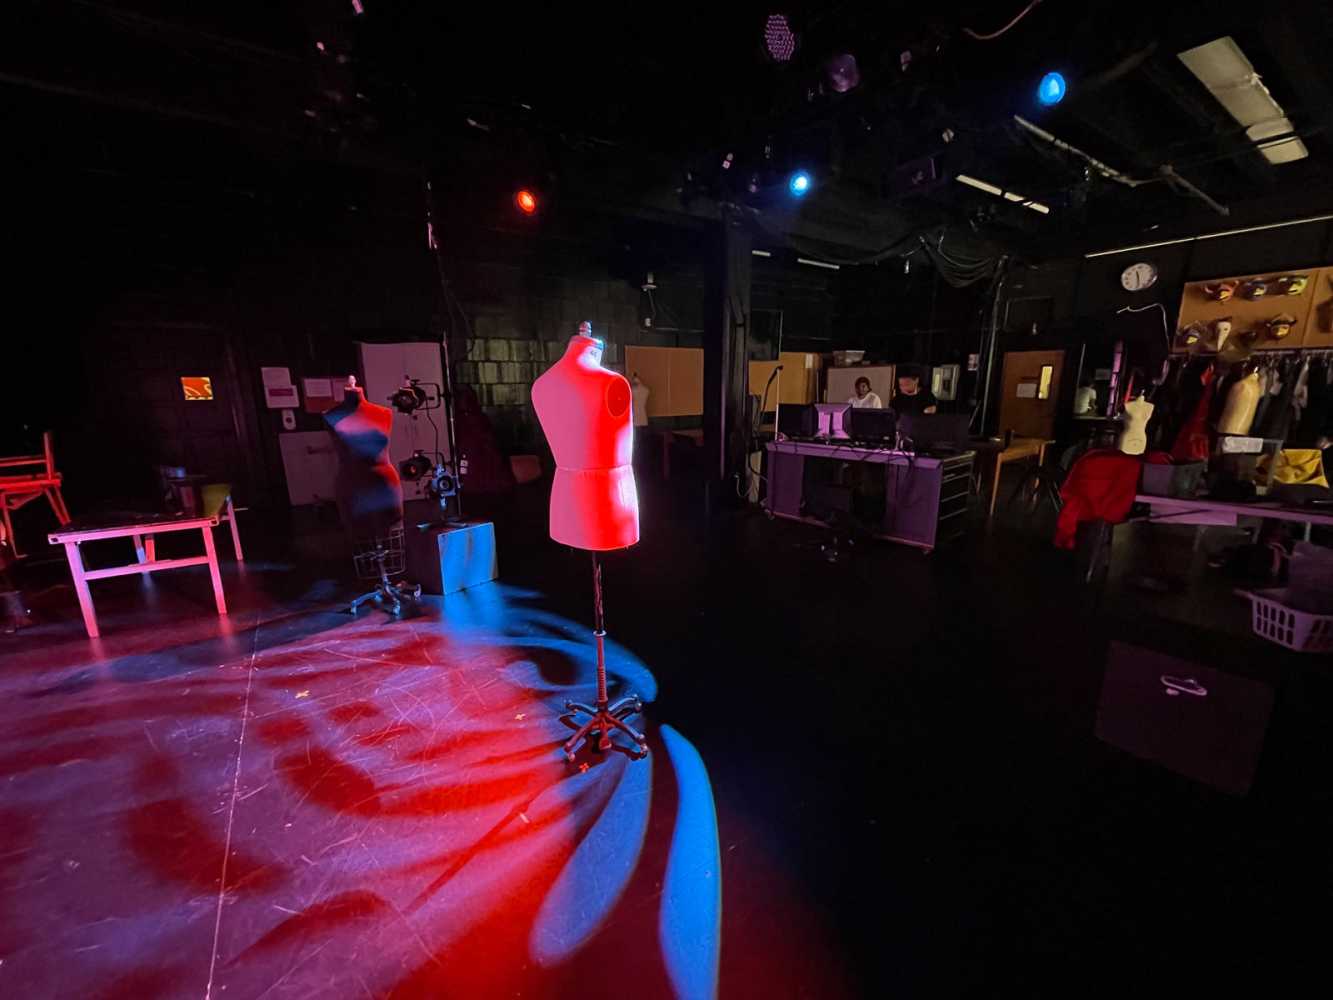 The School of Dramatic Arts’ light lab is a flexible space